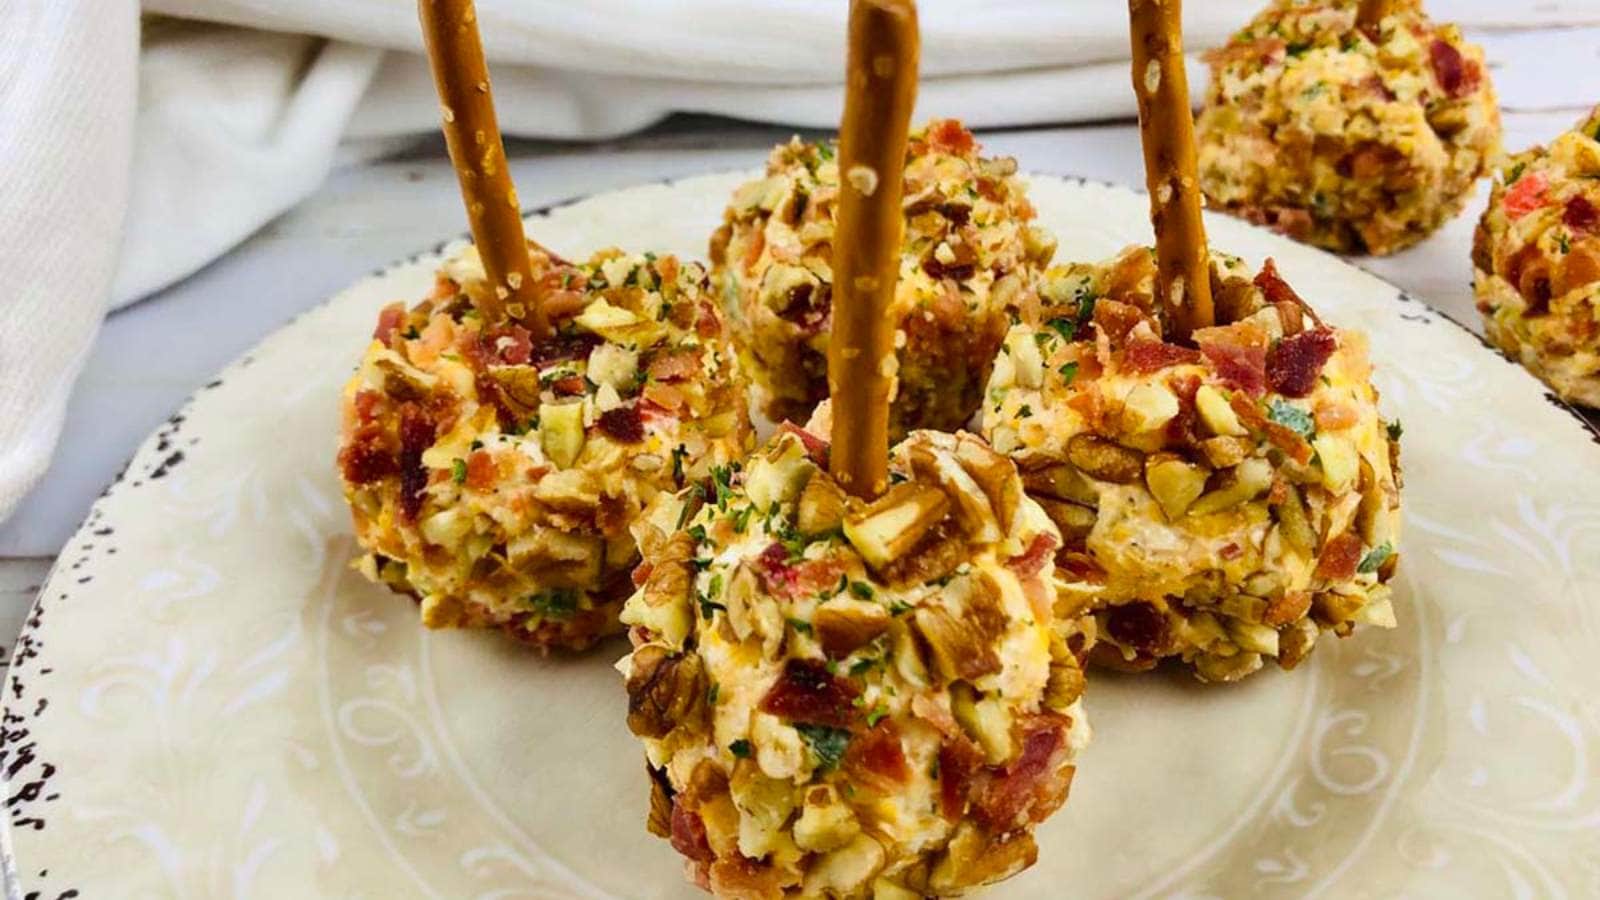 Jalapeño Pimento Cheese Balls recipe by Simply Low Cal.